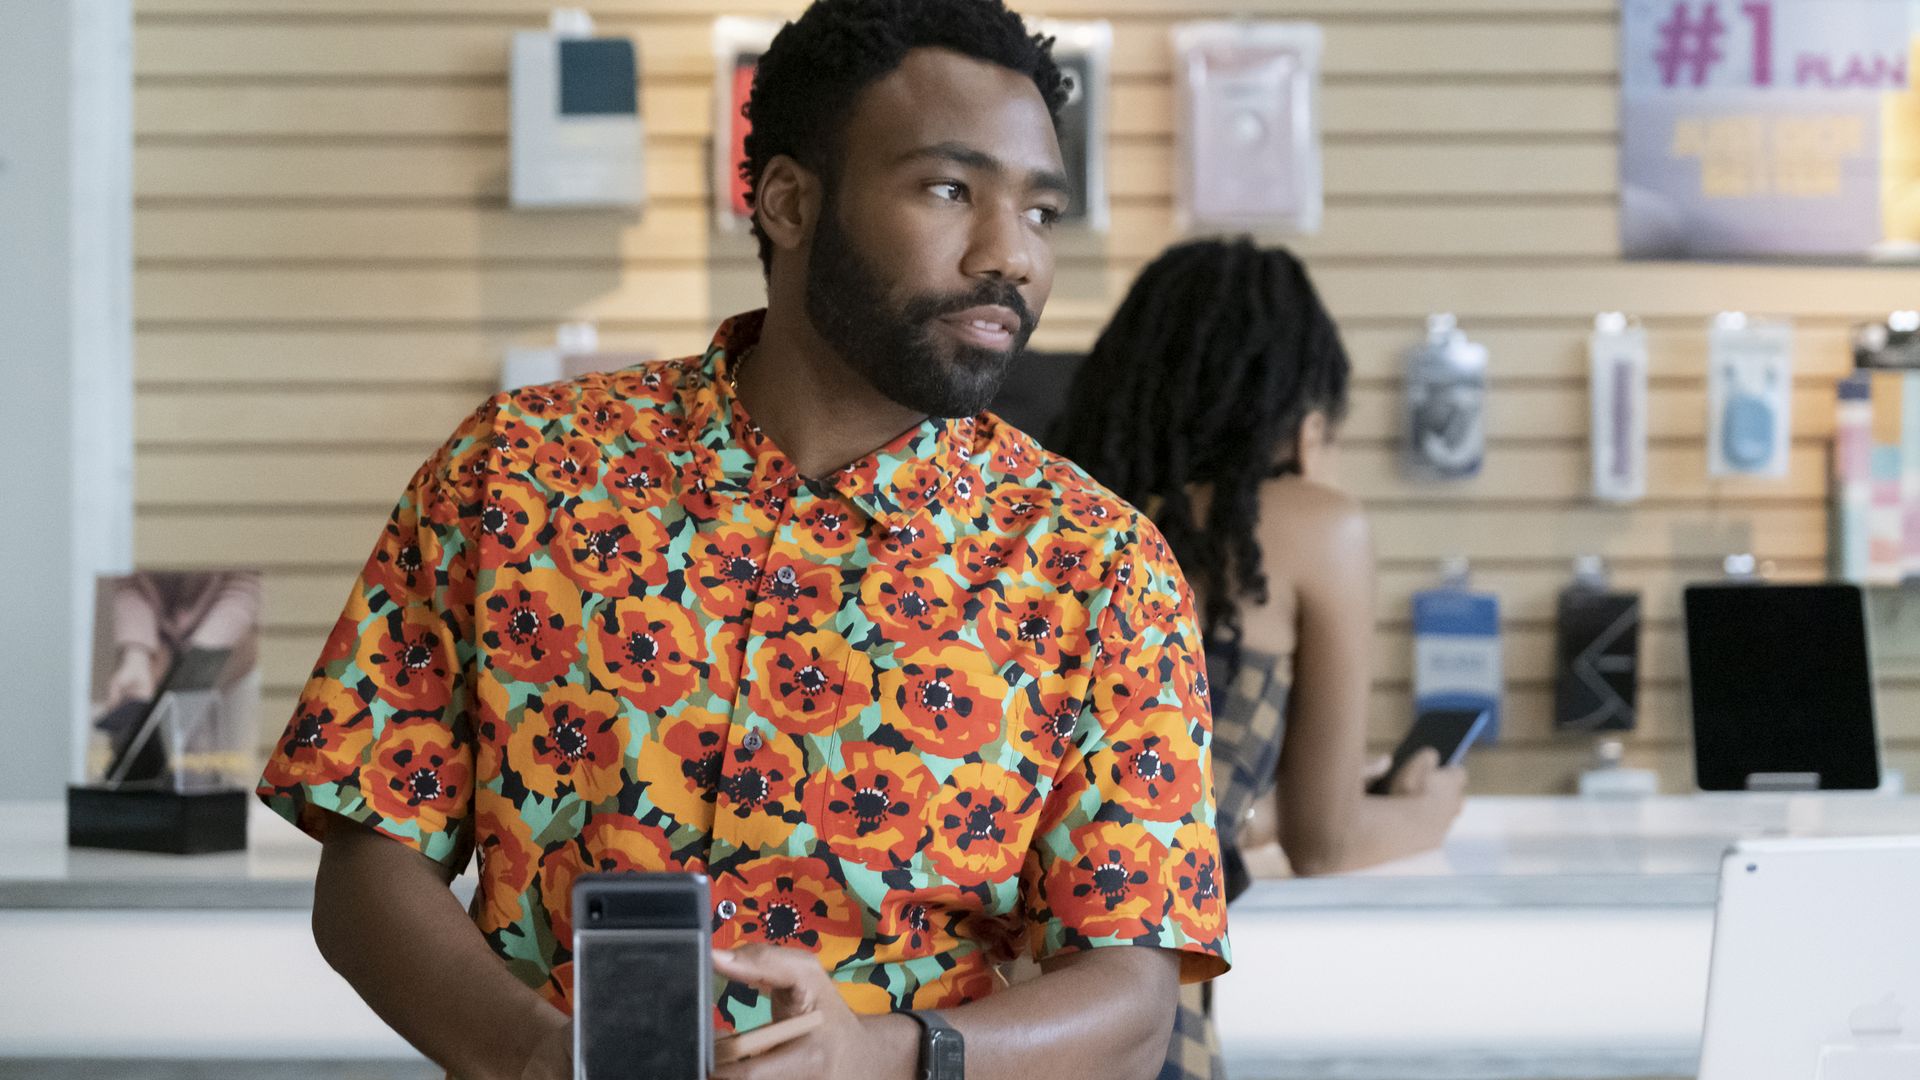 A photo of Donald Glover wearing a colorful shirt in a store in the TV show Atlanta